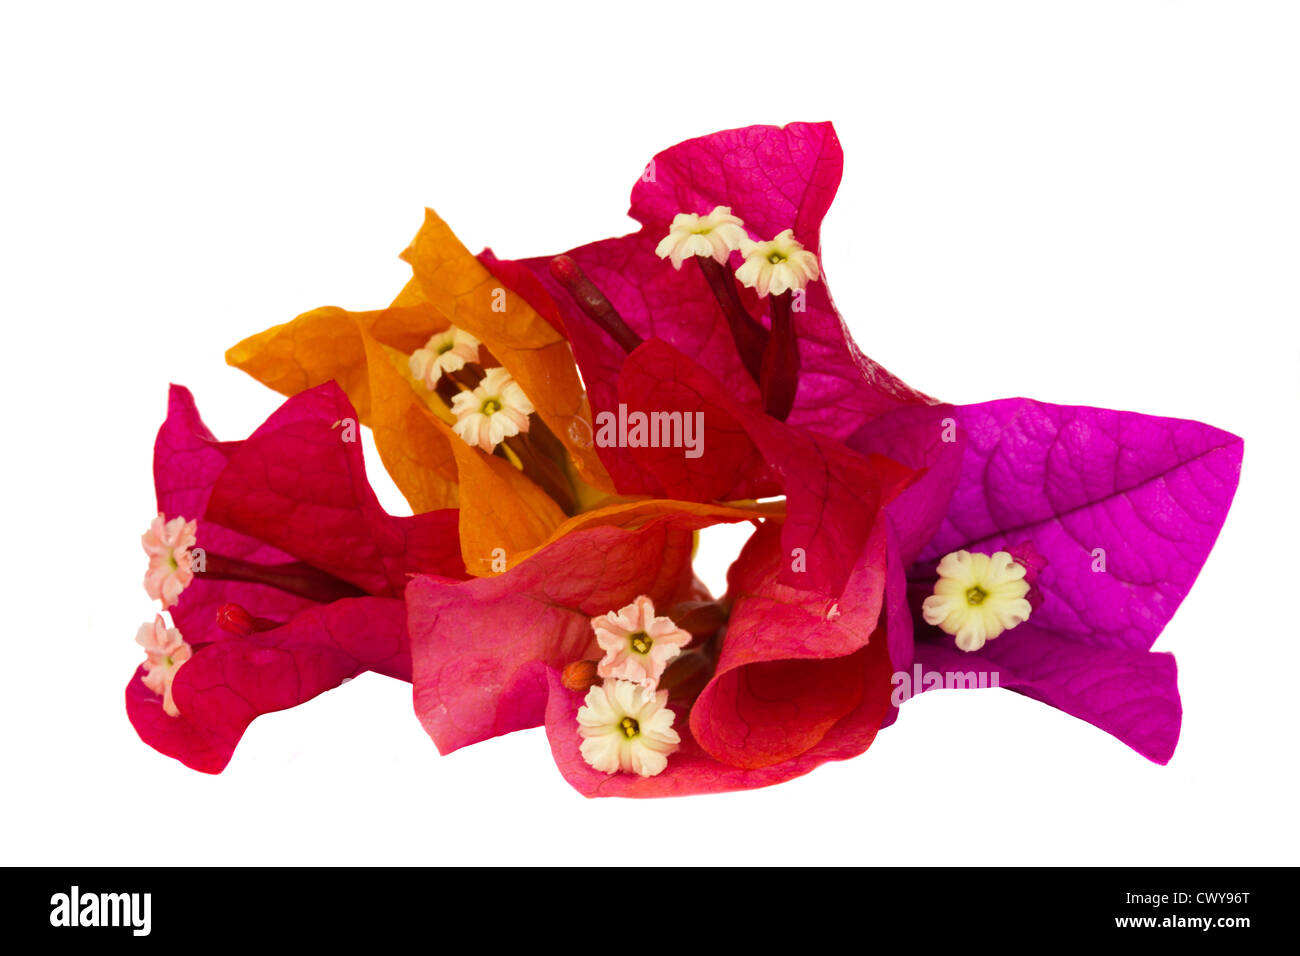 Bougainvillea blooming Cut Out Stock Images & Pictures - Alamy